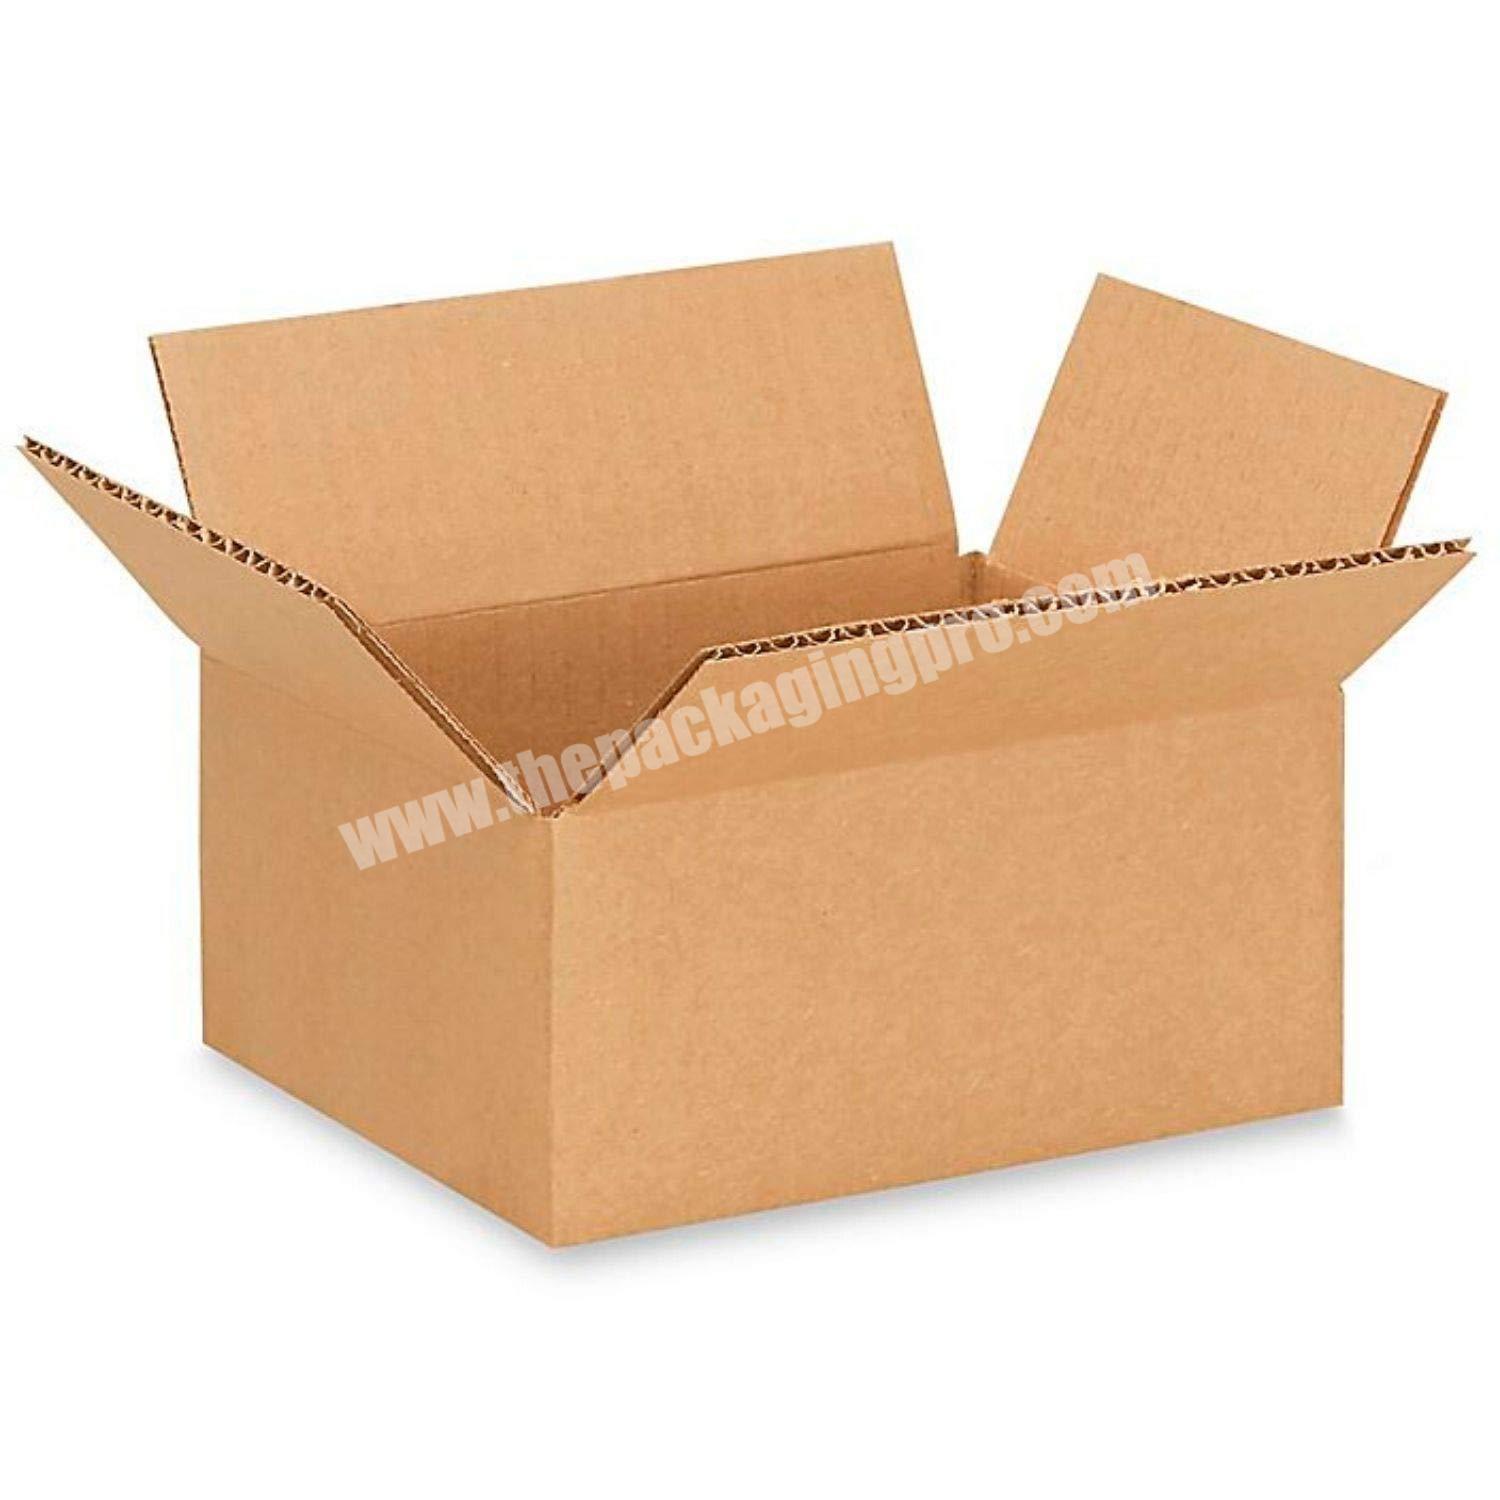 5 layers Custom Printed Cardboard Paper Box Heavy Duty Mailing Packing Shipping Box Recycled Storage Corrugated Carton